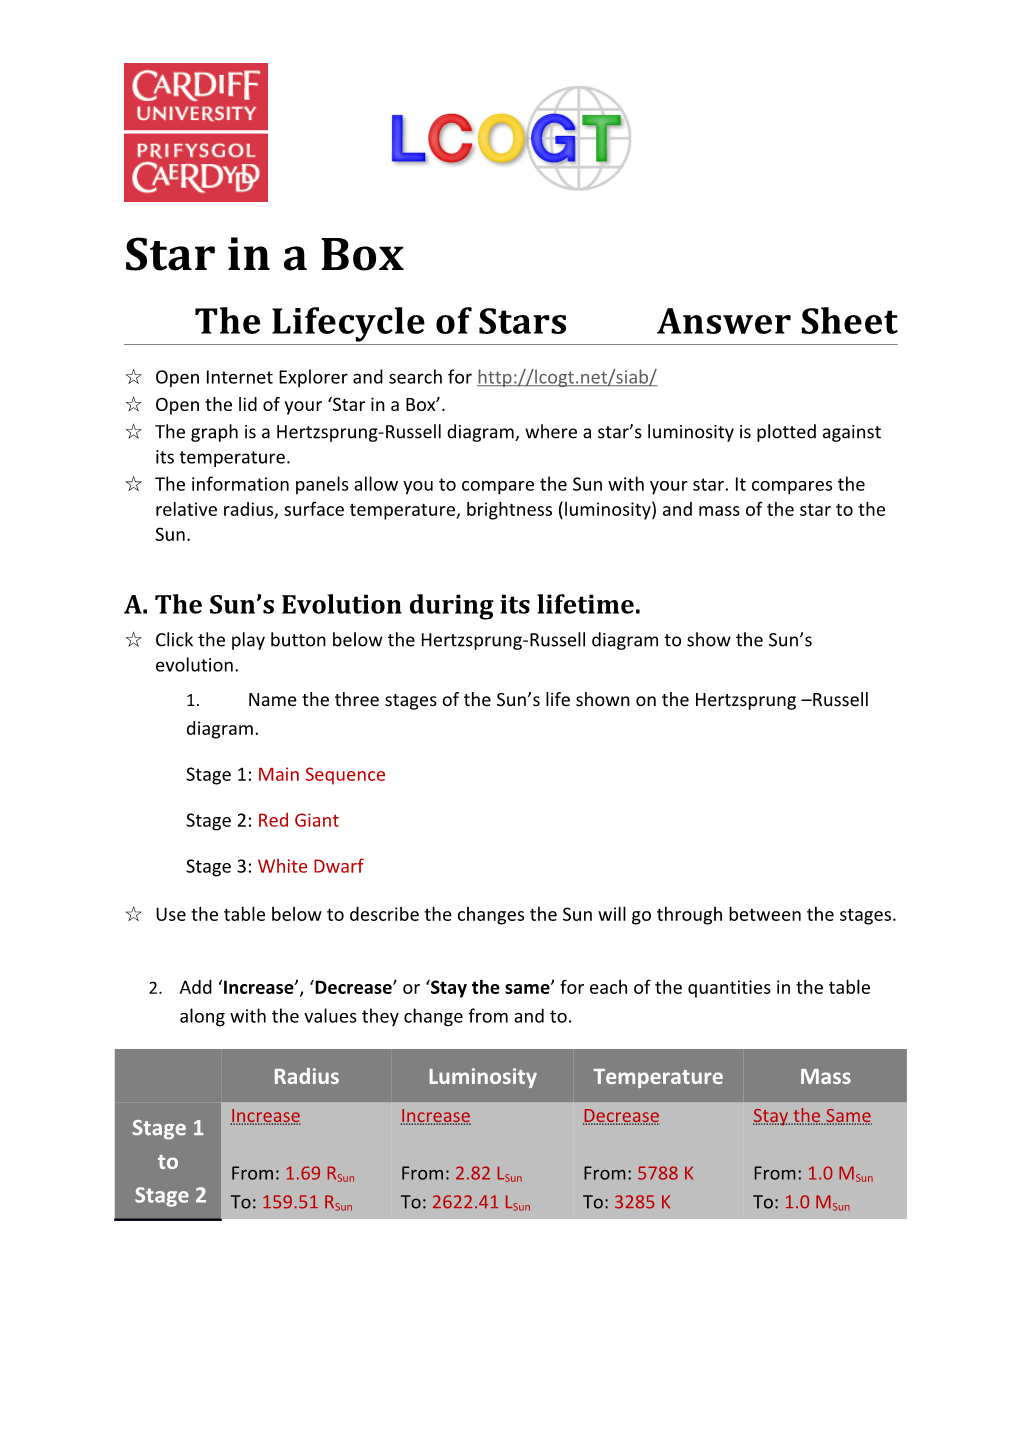 The Lifecycle of Starsanswer Sheet